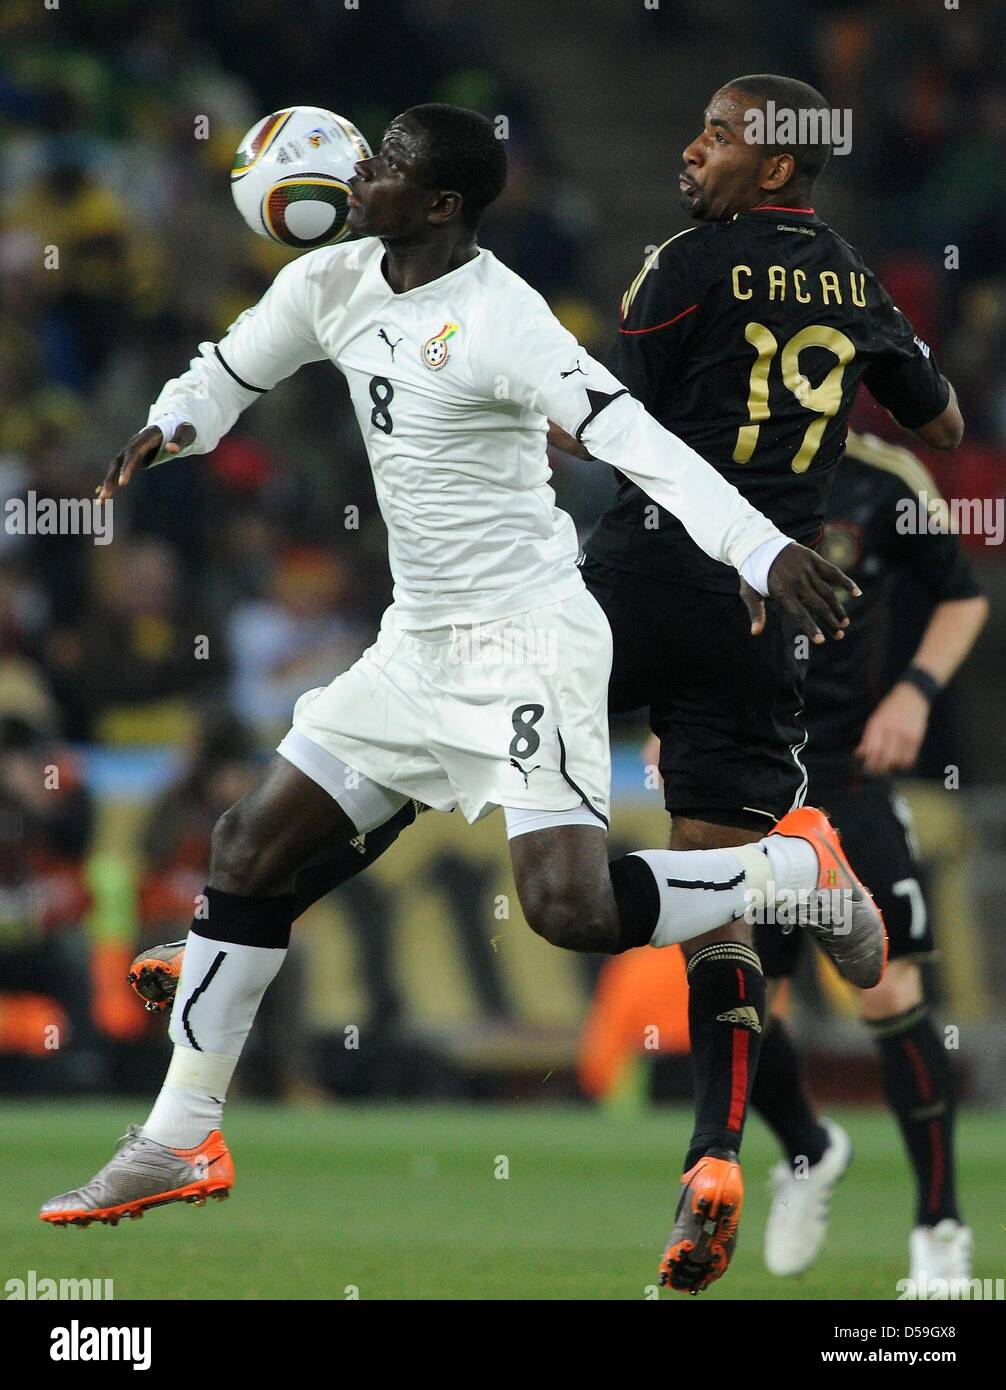 Germany's Cacau (R) and Ghana's Jonathan Mensah vie for the ball during the 2010 FIFA World Cup group D match between Ghana and Germany at Soccer City, Johannesburg, South Africa 23 June 2010. Photo: Marcus Brandt dpa - Please refer to http://dpaq.de/FIFA-WM2010-TC Stock Photo